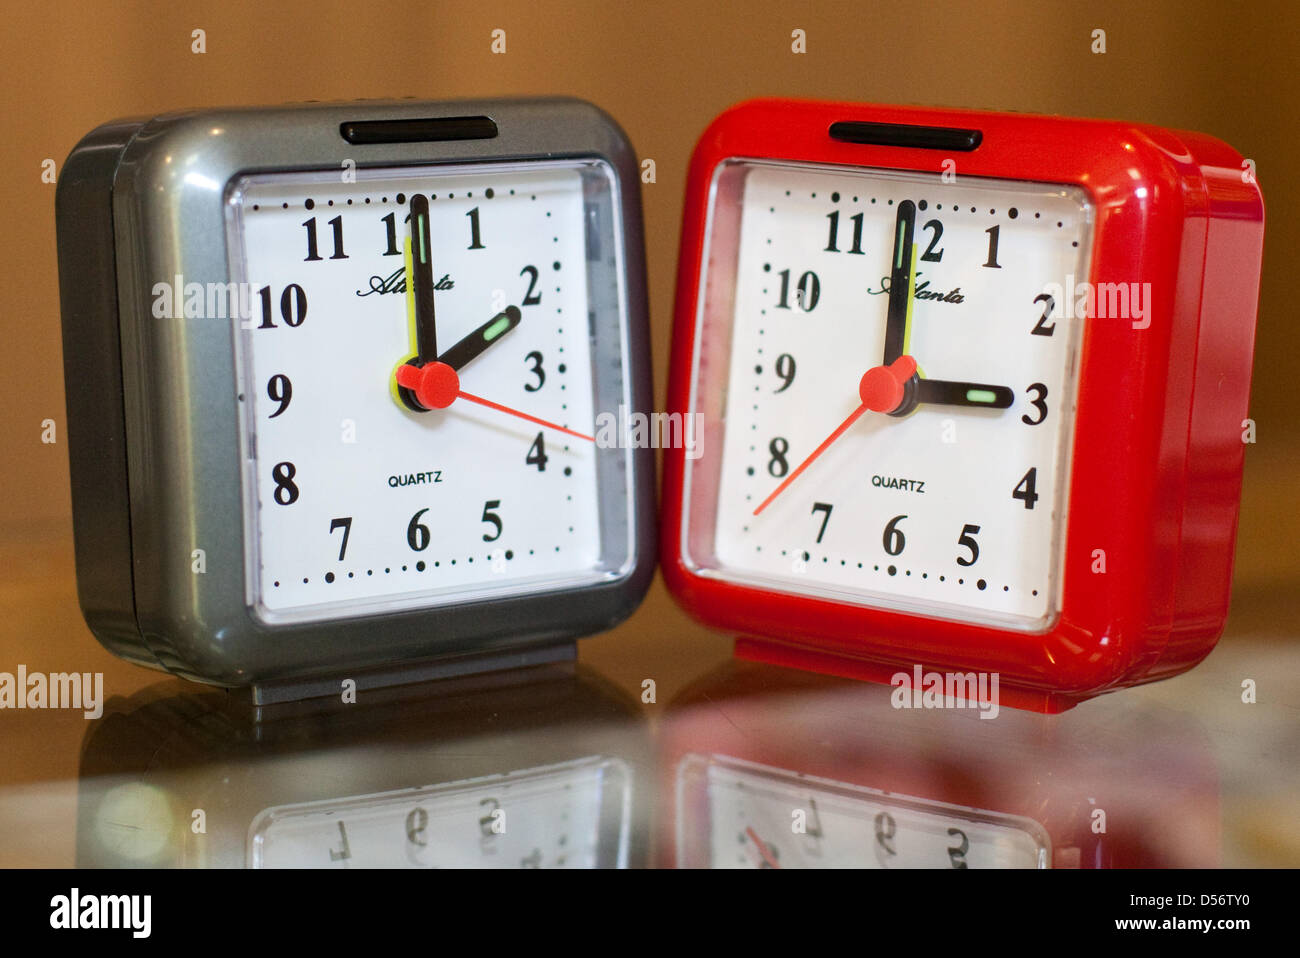 Two alarm clocks in Eberswalde, Germany, 26 March 2010. Daylight saving time starts in Germany on 28 March. Clocks are advanced by one hour from 1 a.m. (GMT) to 2 a.m. (GMT). Photo: Patrick Pleul Stock Photo